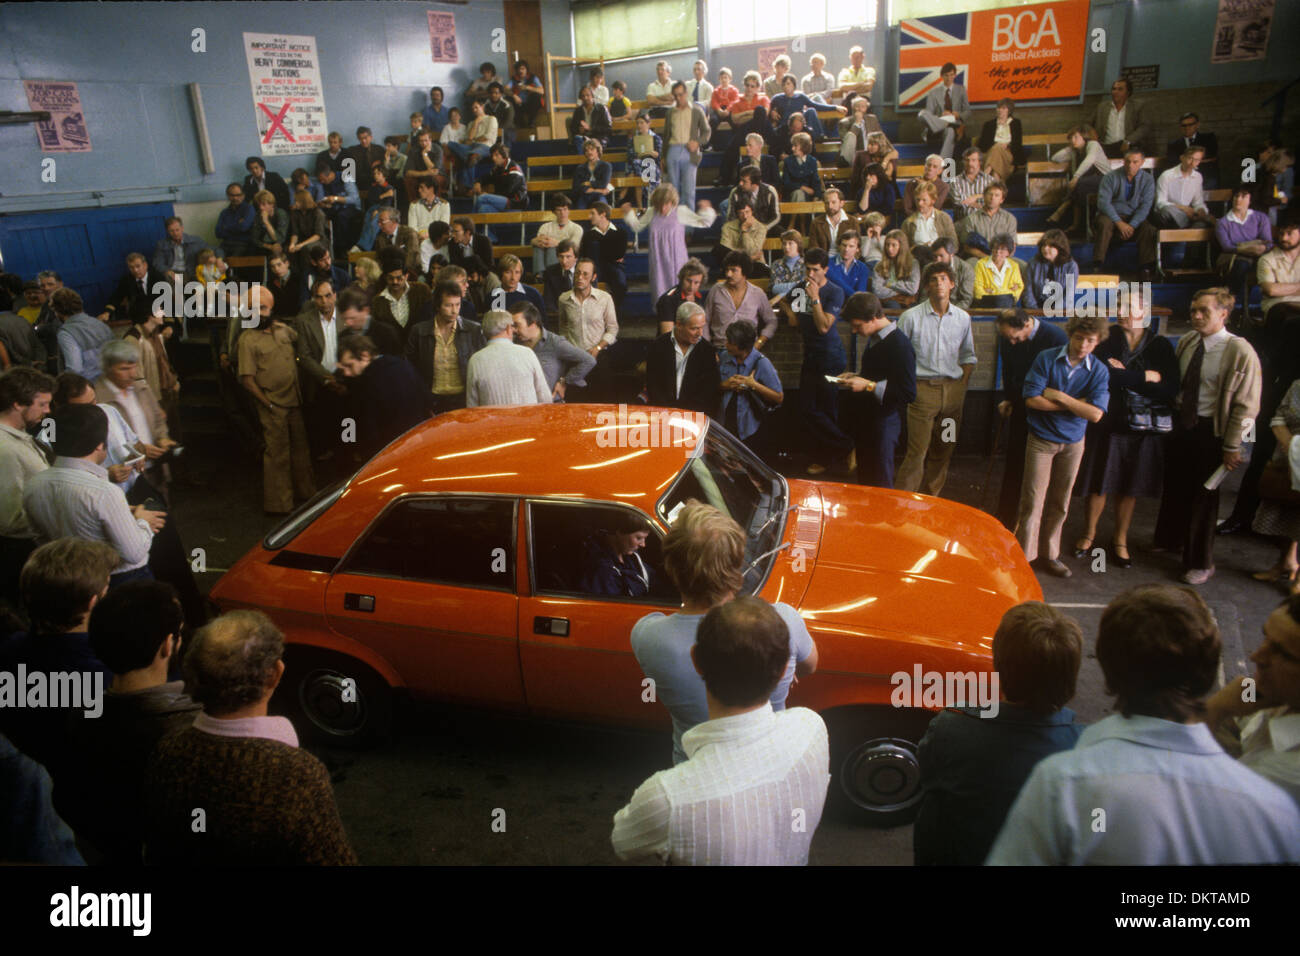 British Car Auctions secondhand car cars about to be auctioned. Buyers gather in order to watch or make a bid. Wandsworth Bridge Road, Fulham, London, England. 1981 1980s UK HOMER SYKES Stock Photo